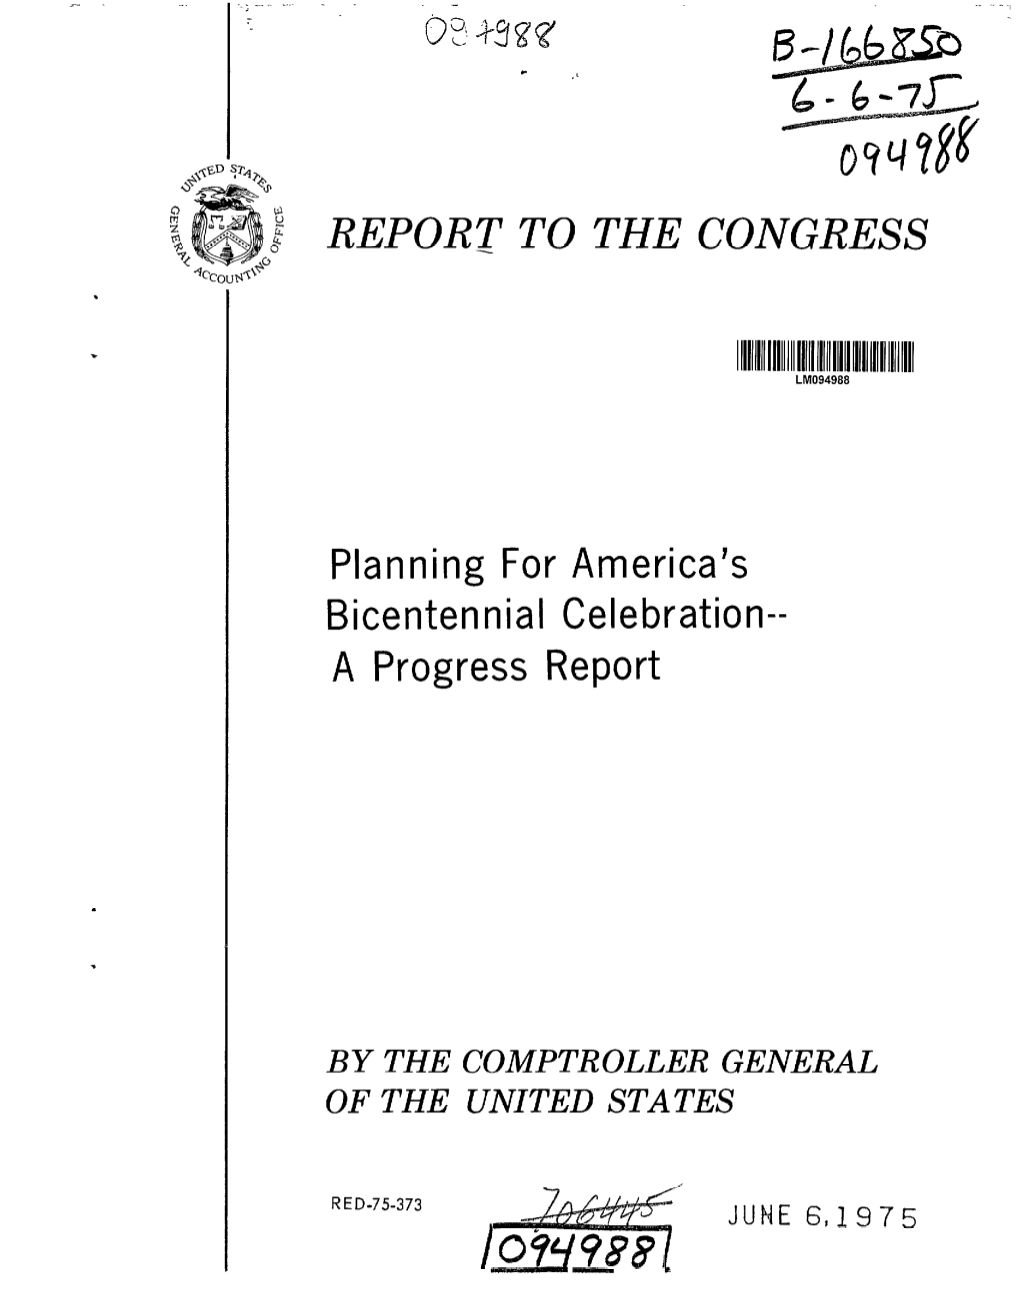 RED-75-373 Planning for America's Bicentennial Celebration--A